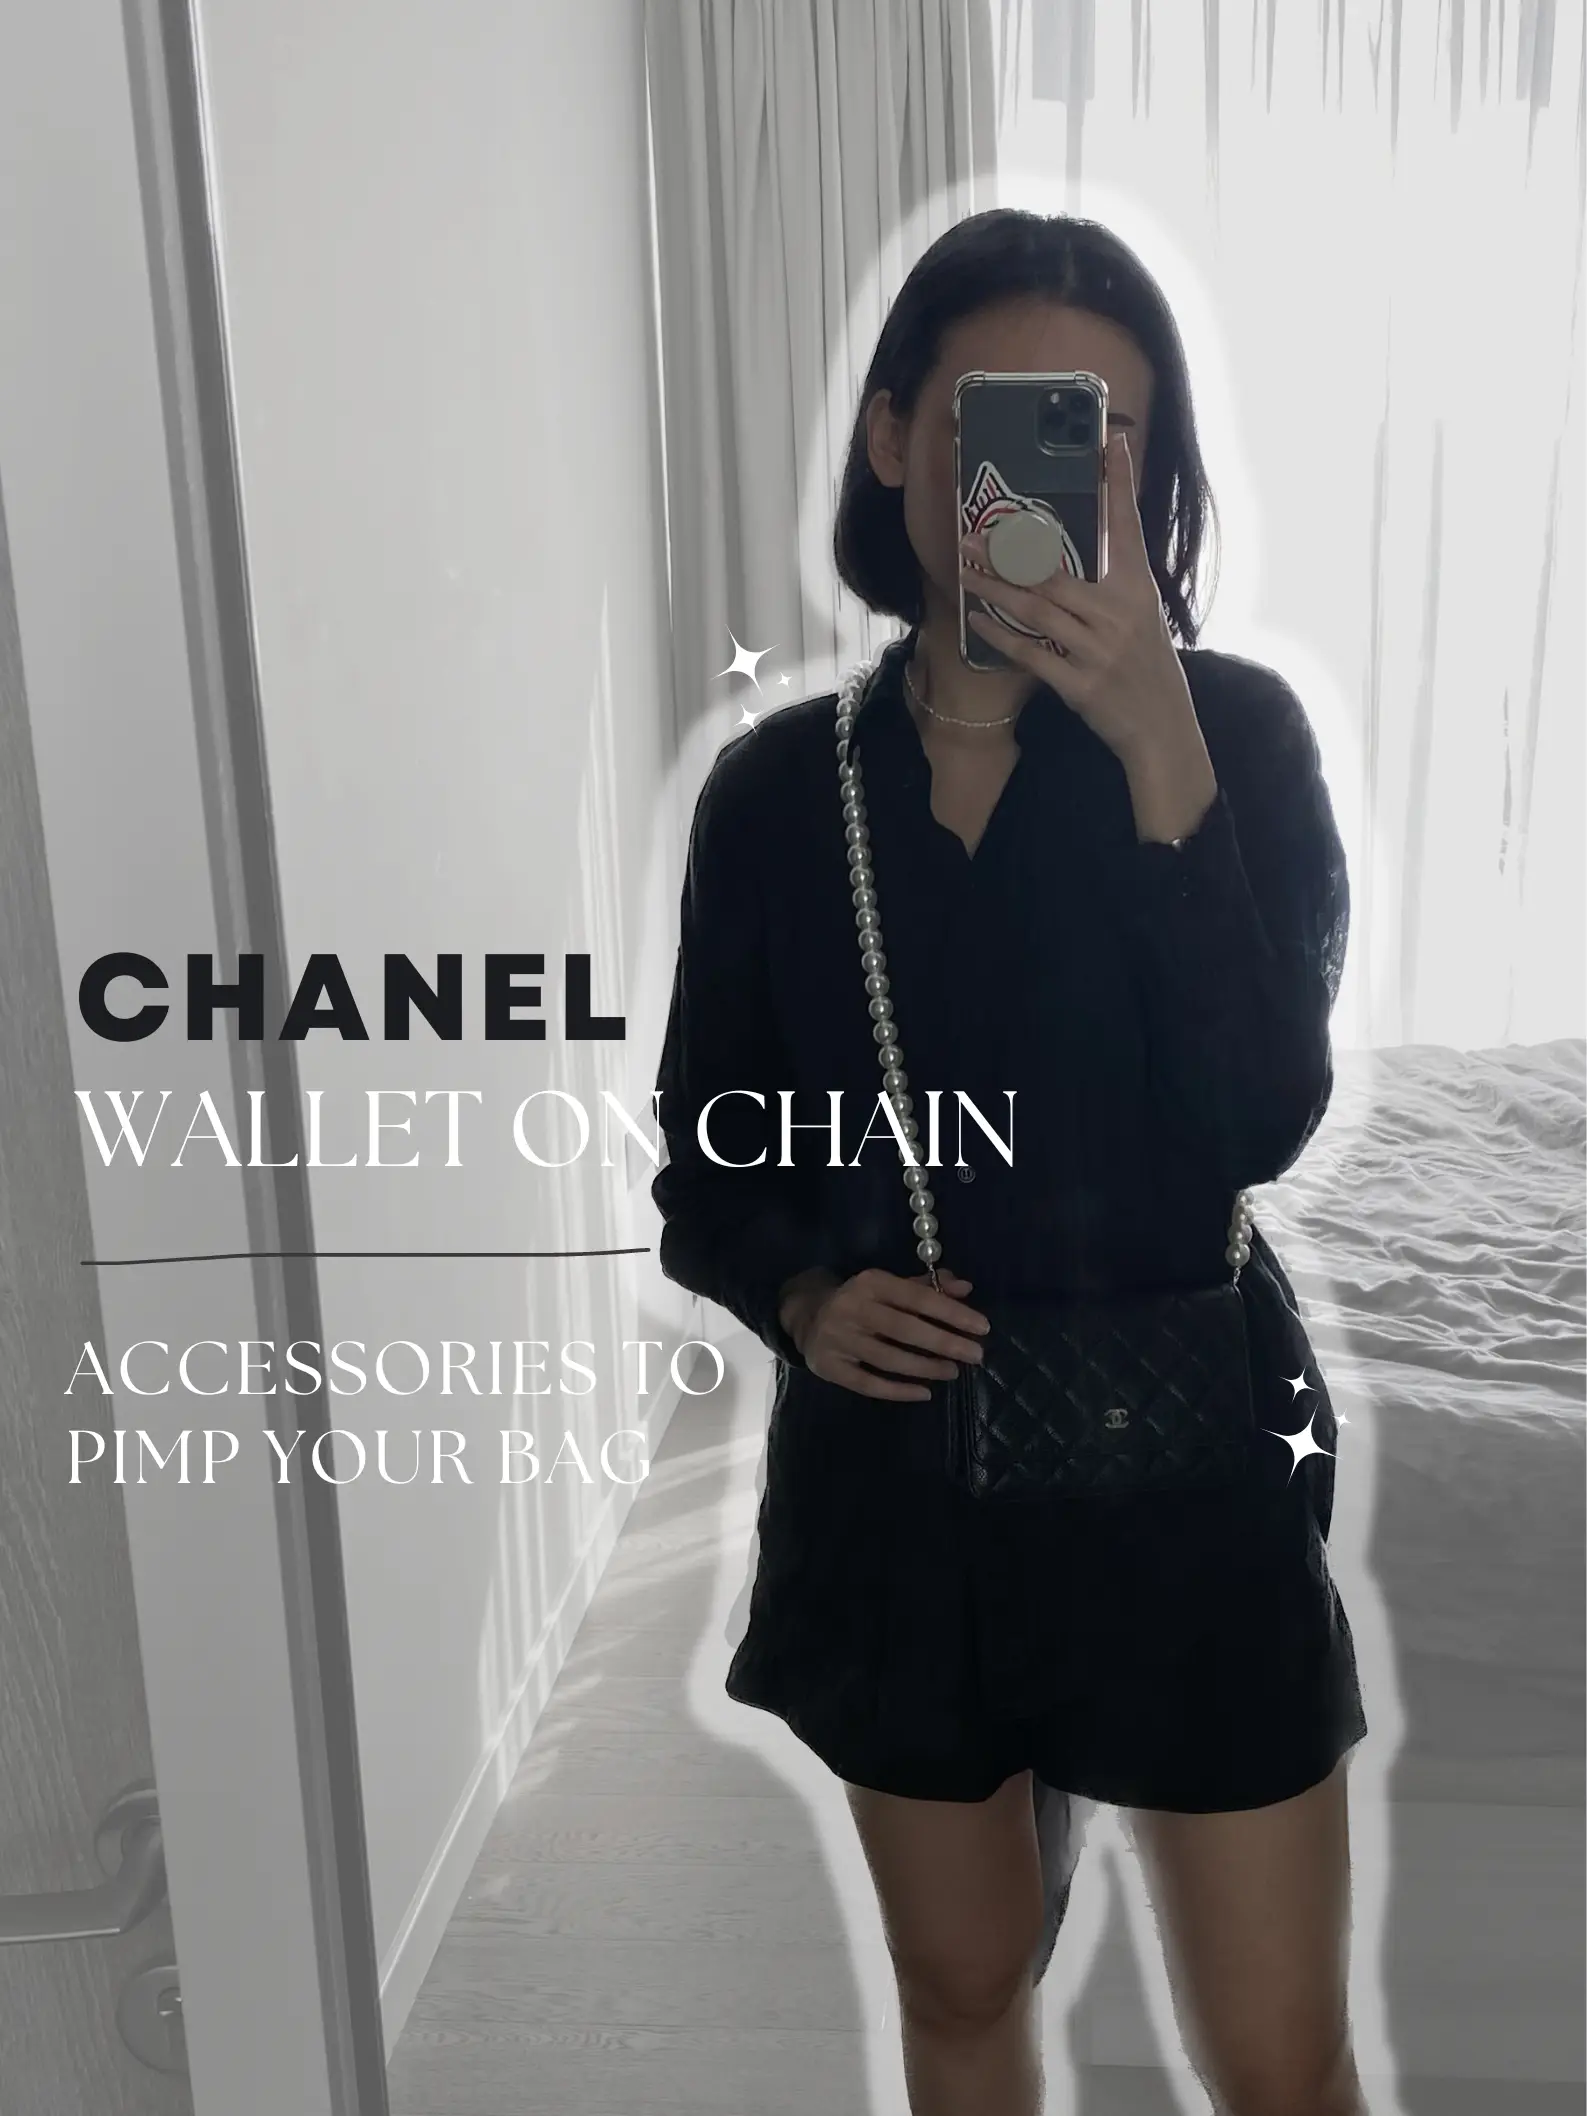 Pimp your Chanel WOC / bags with these accessories, Gallery posted by Rie  ☁️